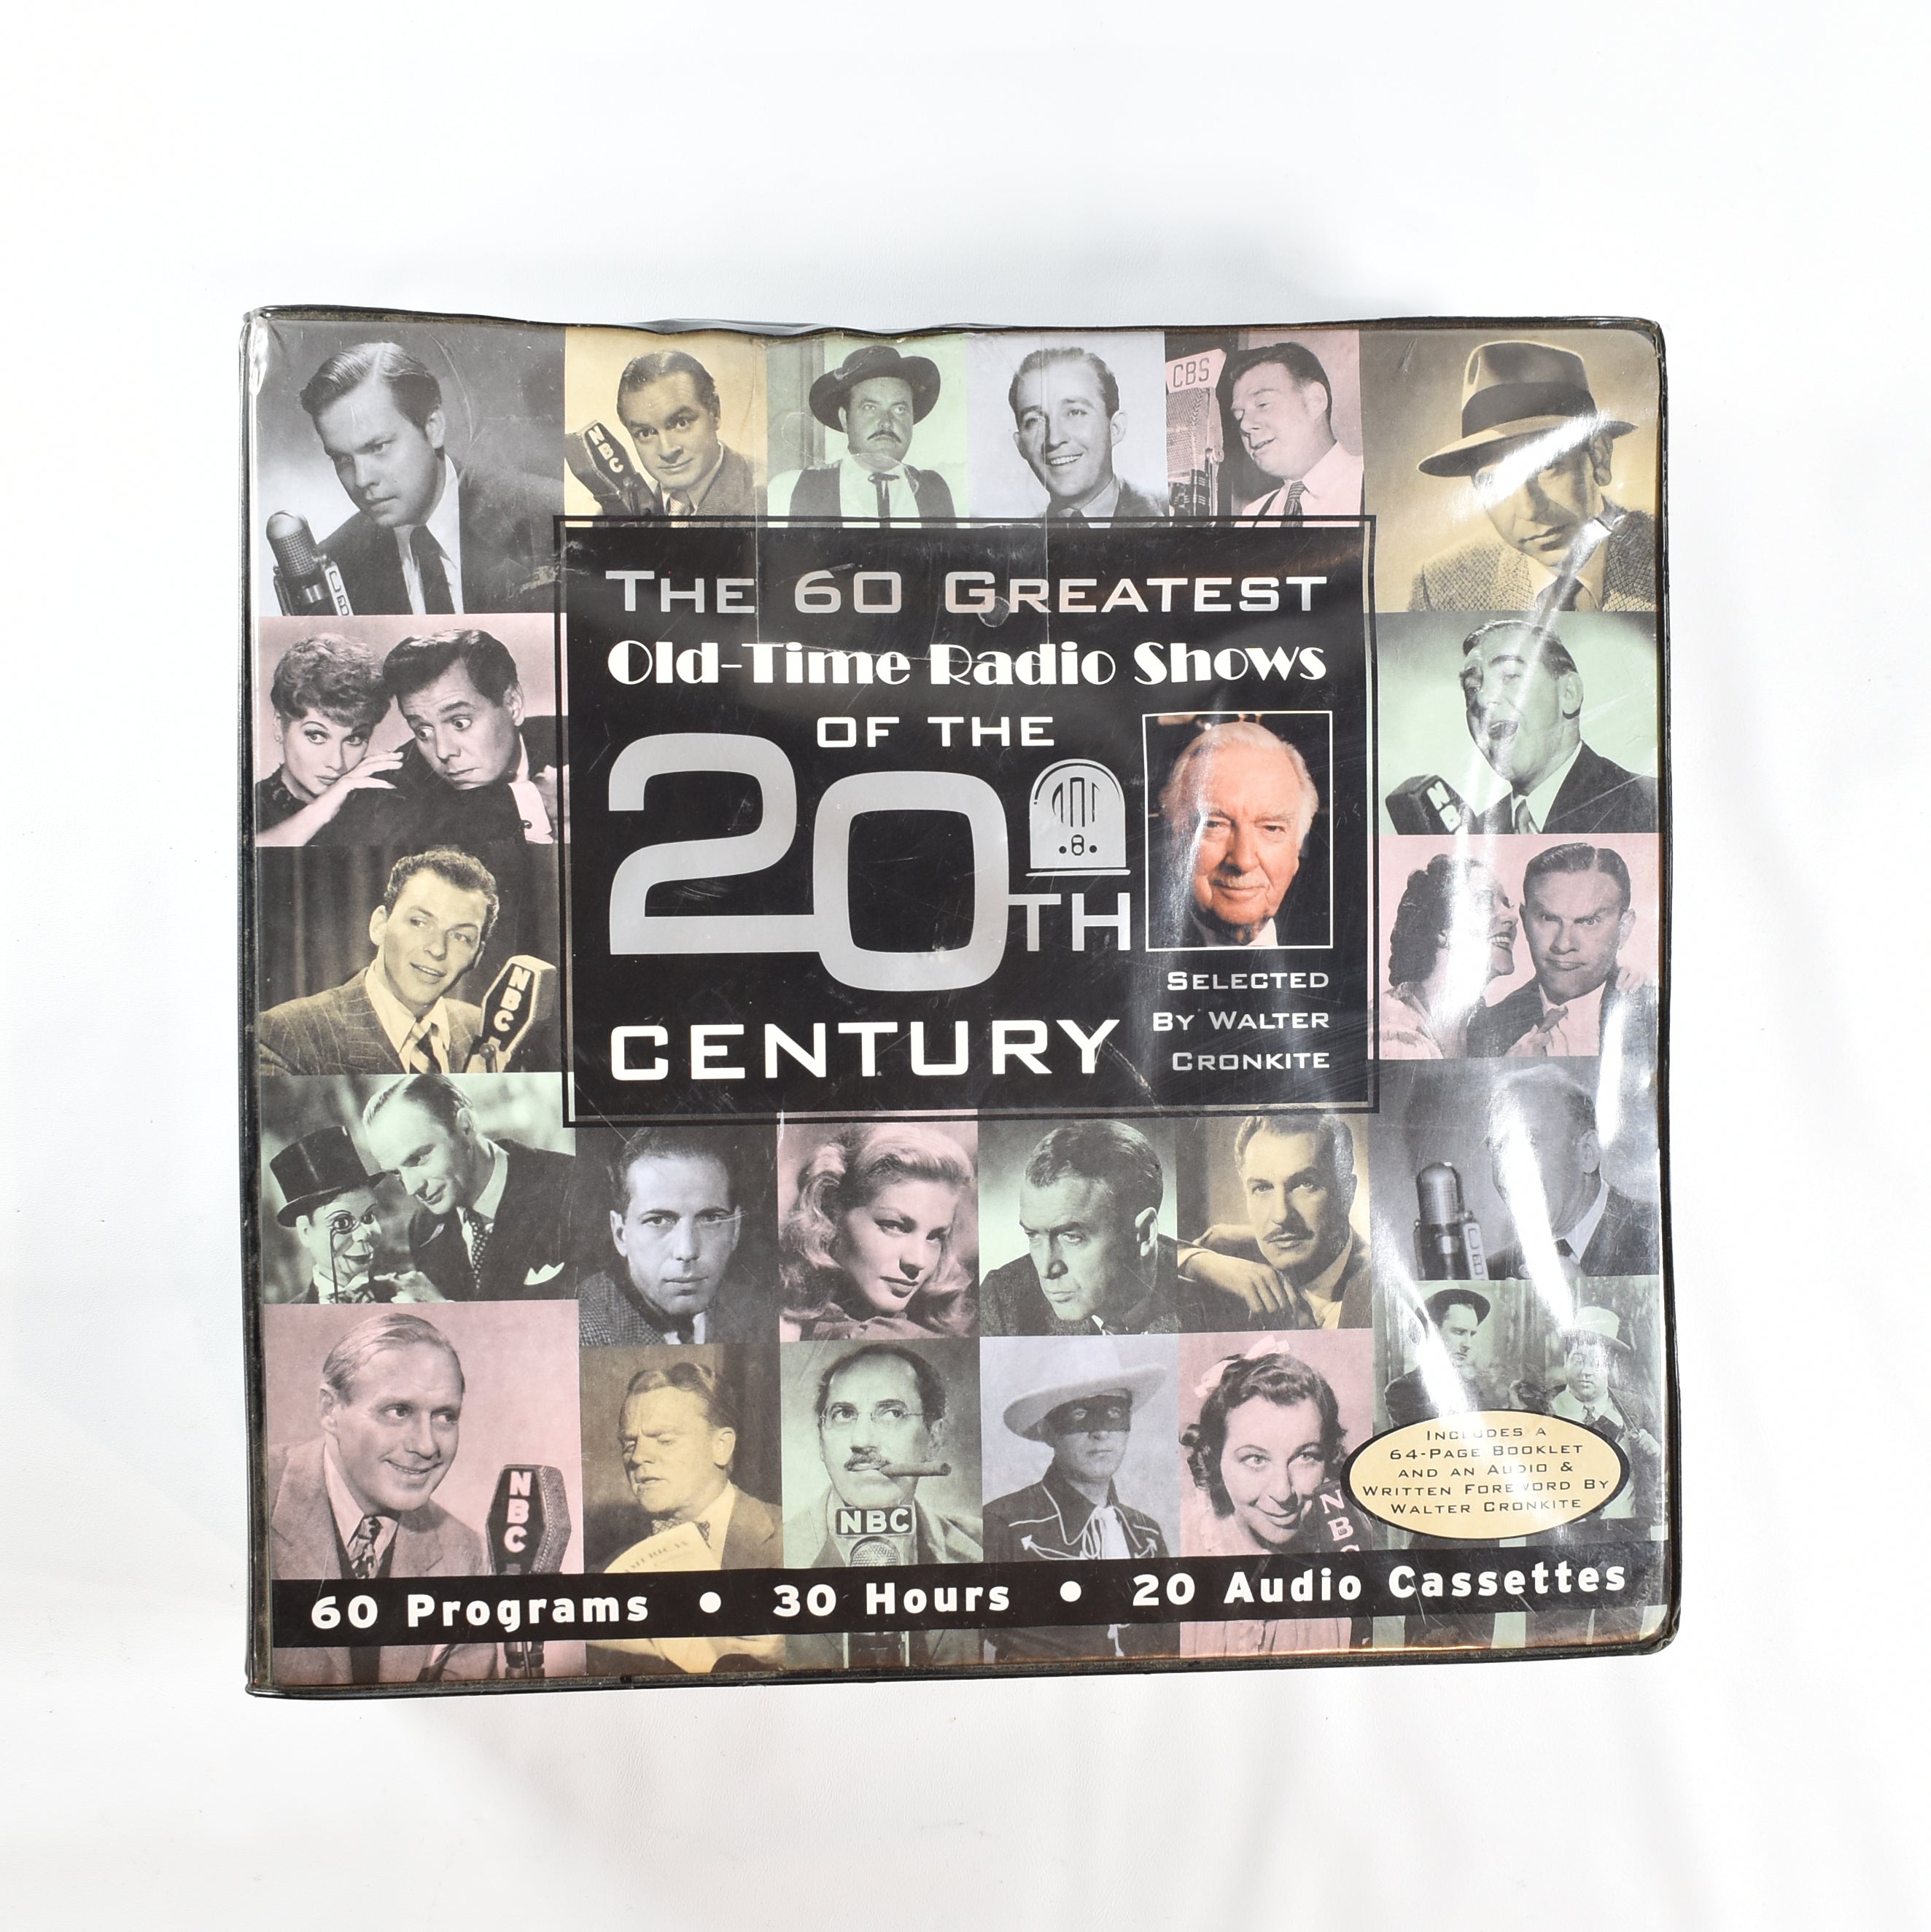 60 Greatest Old Time Radio Shows 20th Century Used Complete set Tapes